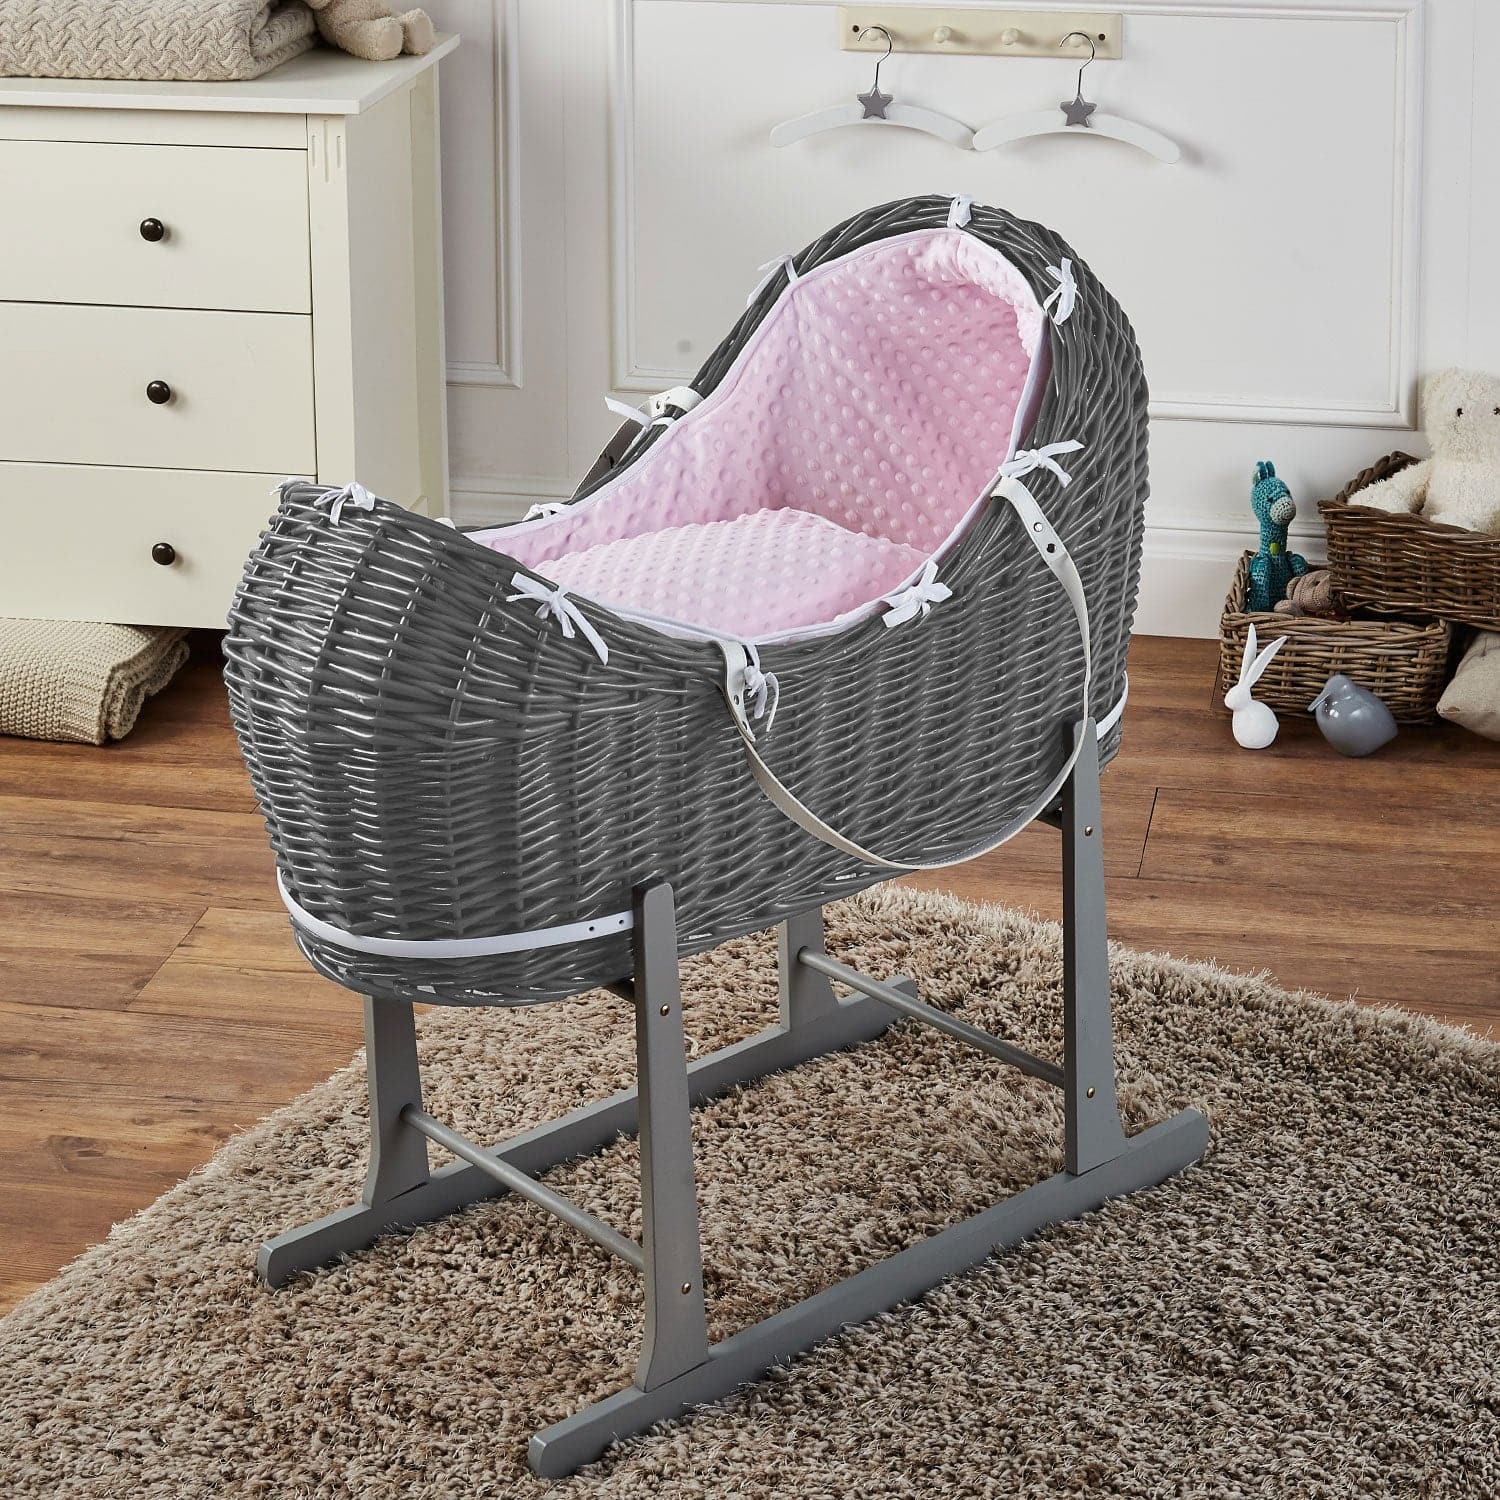 Wicker Deluxe Pod Baby Moses Basket With Stand - Grey / Dimple / Pink | For Your Little One